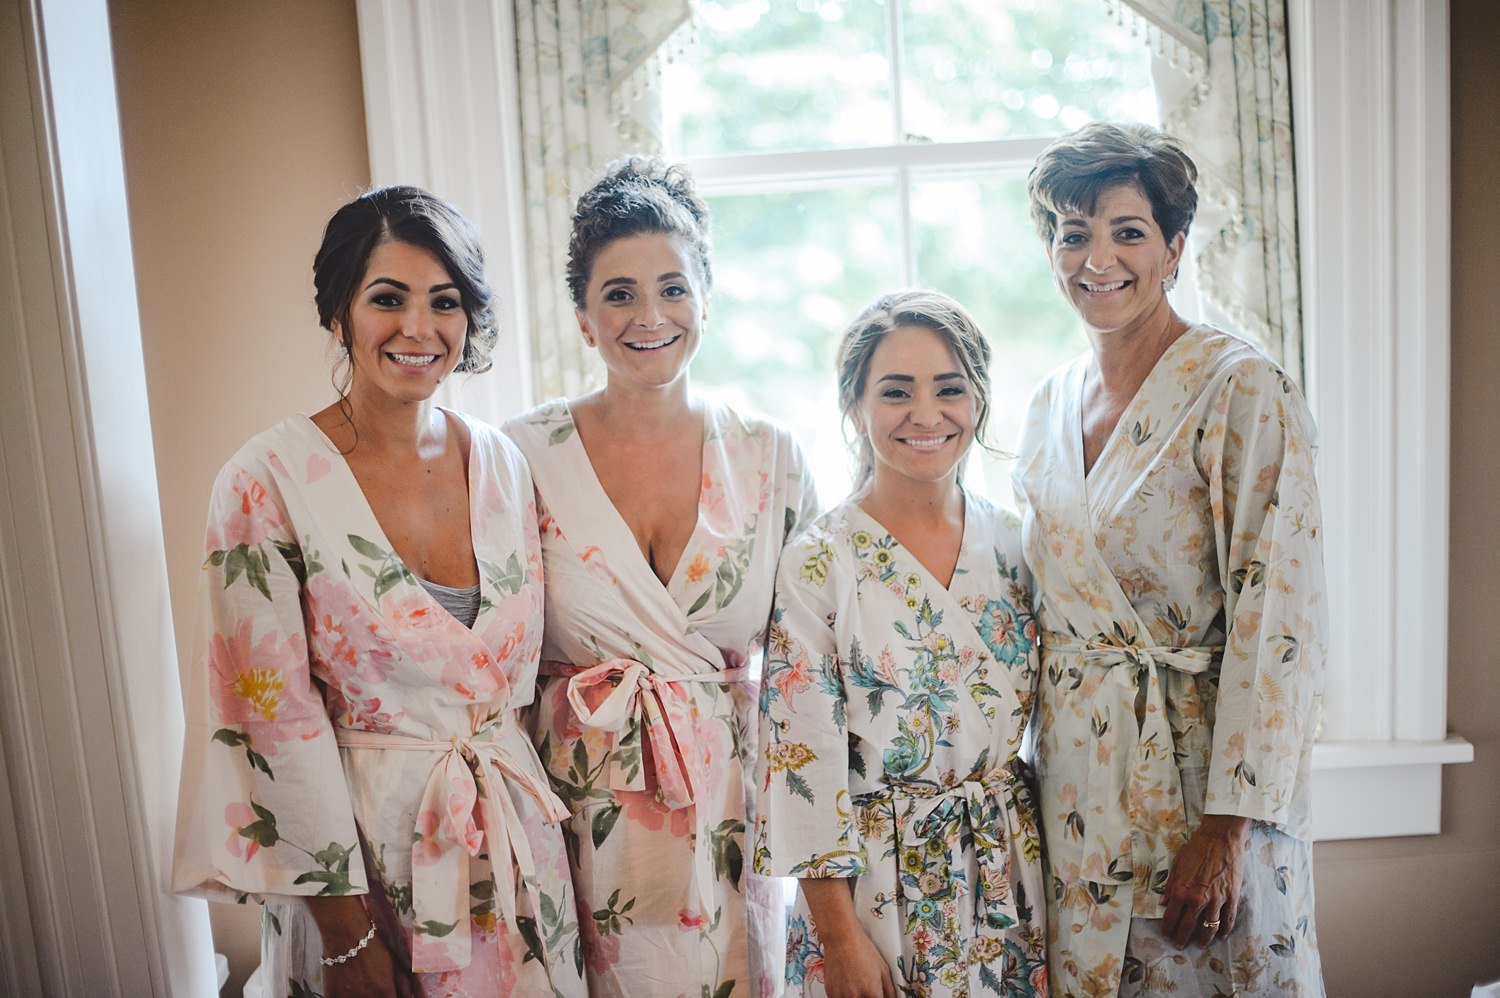 Bride and bridesmaids in custom getting ready robes